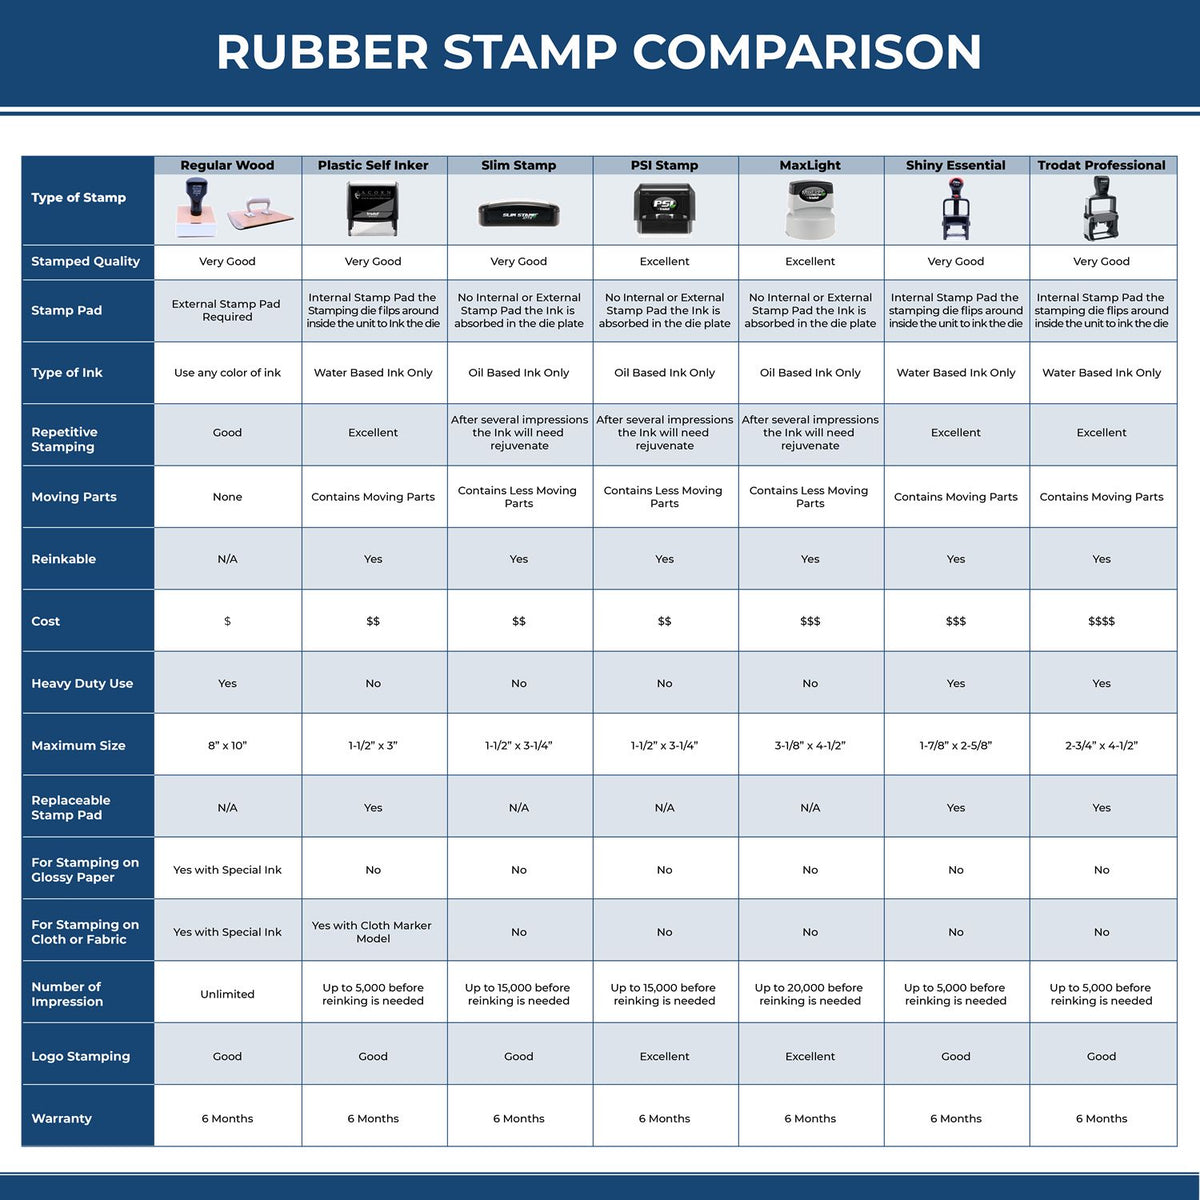 A comparison chart for the different types of mount models available for the California Professional Engineer Seal Stamp.